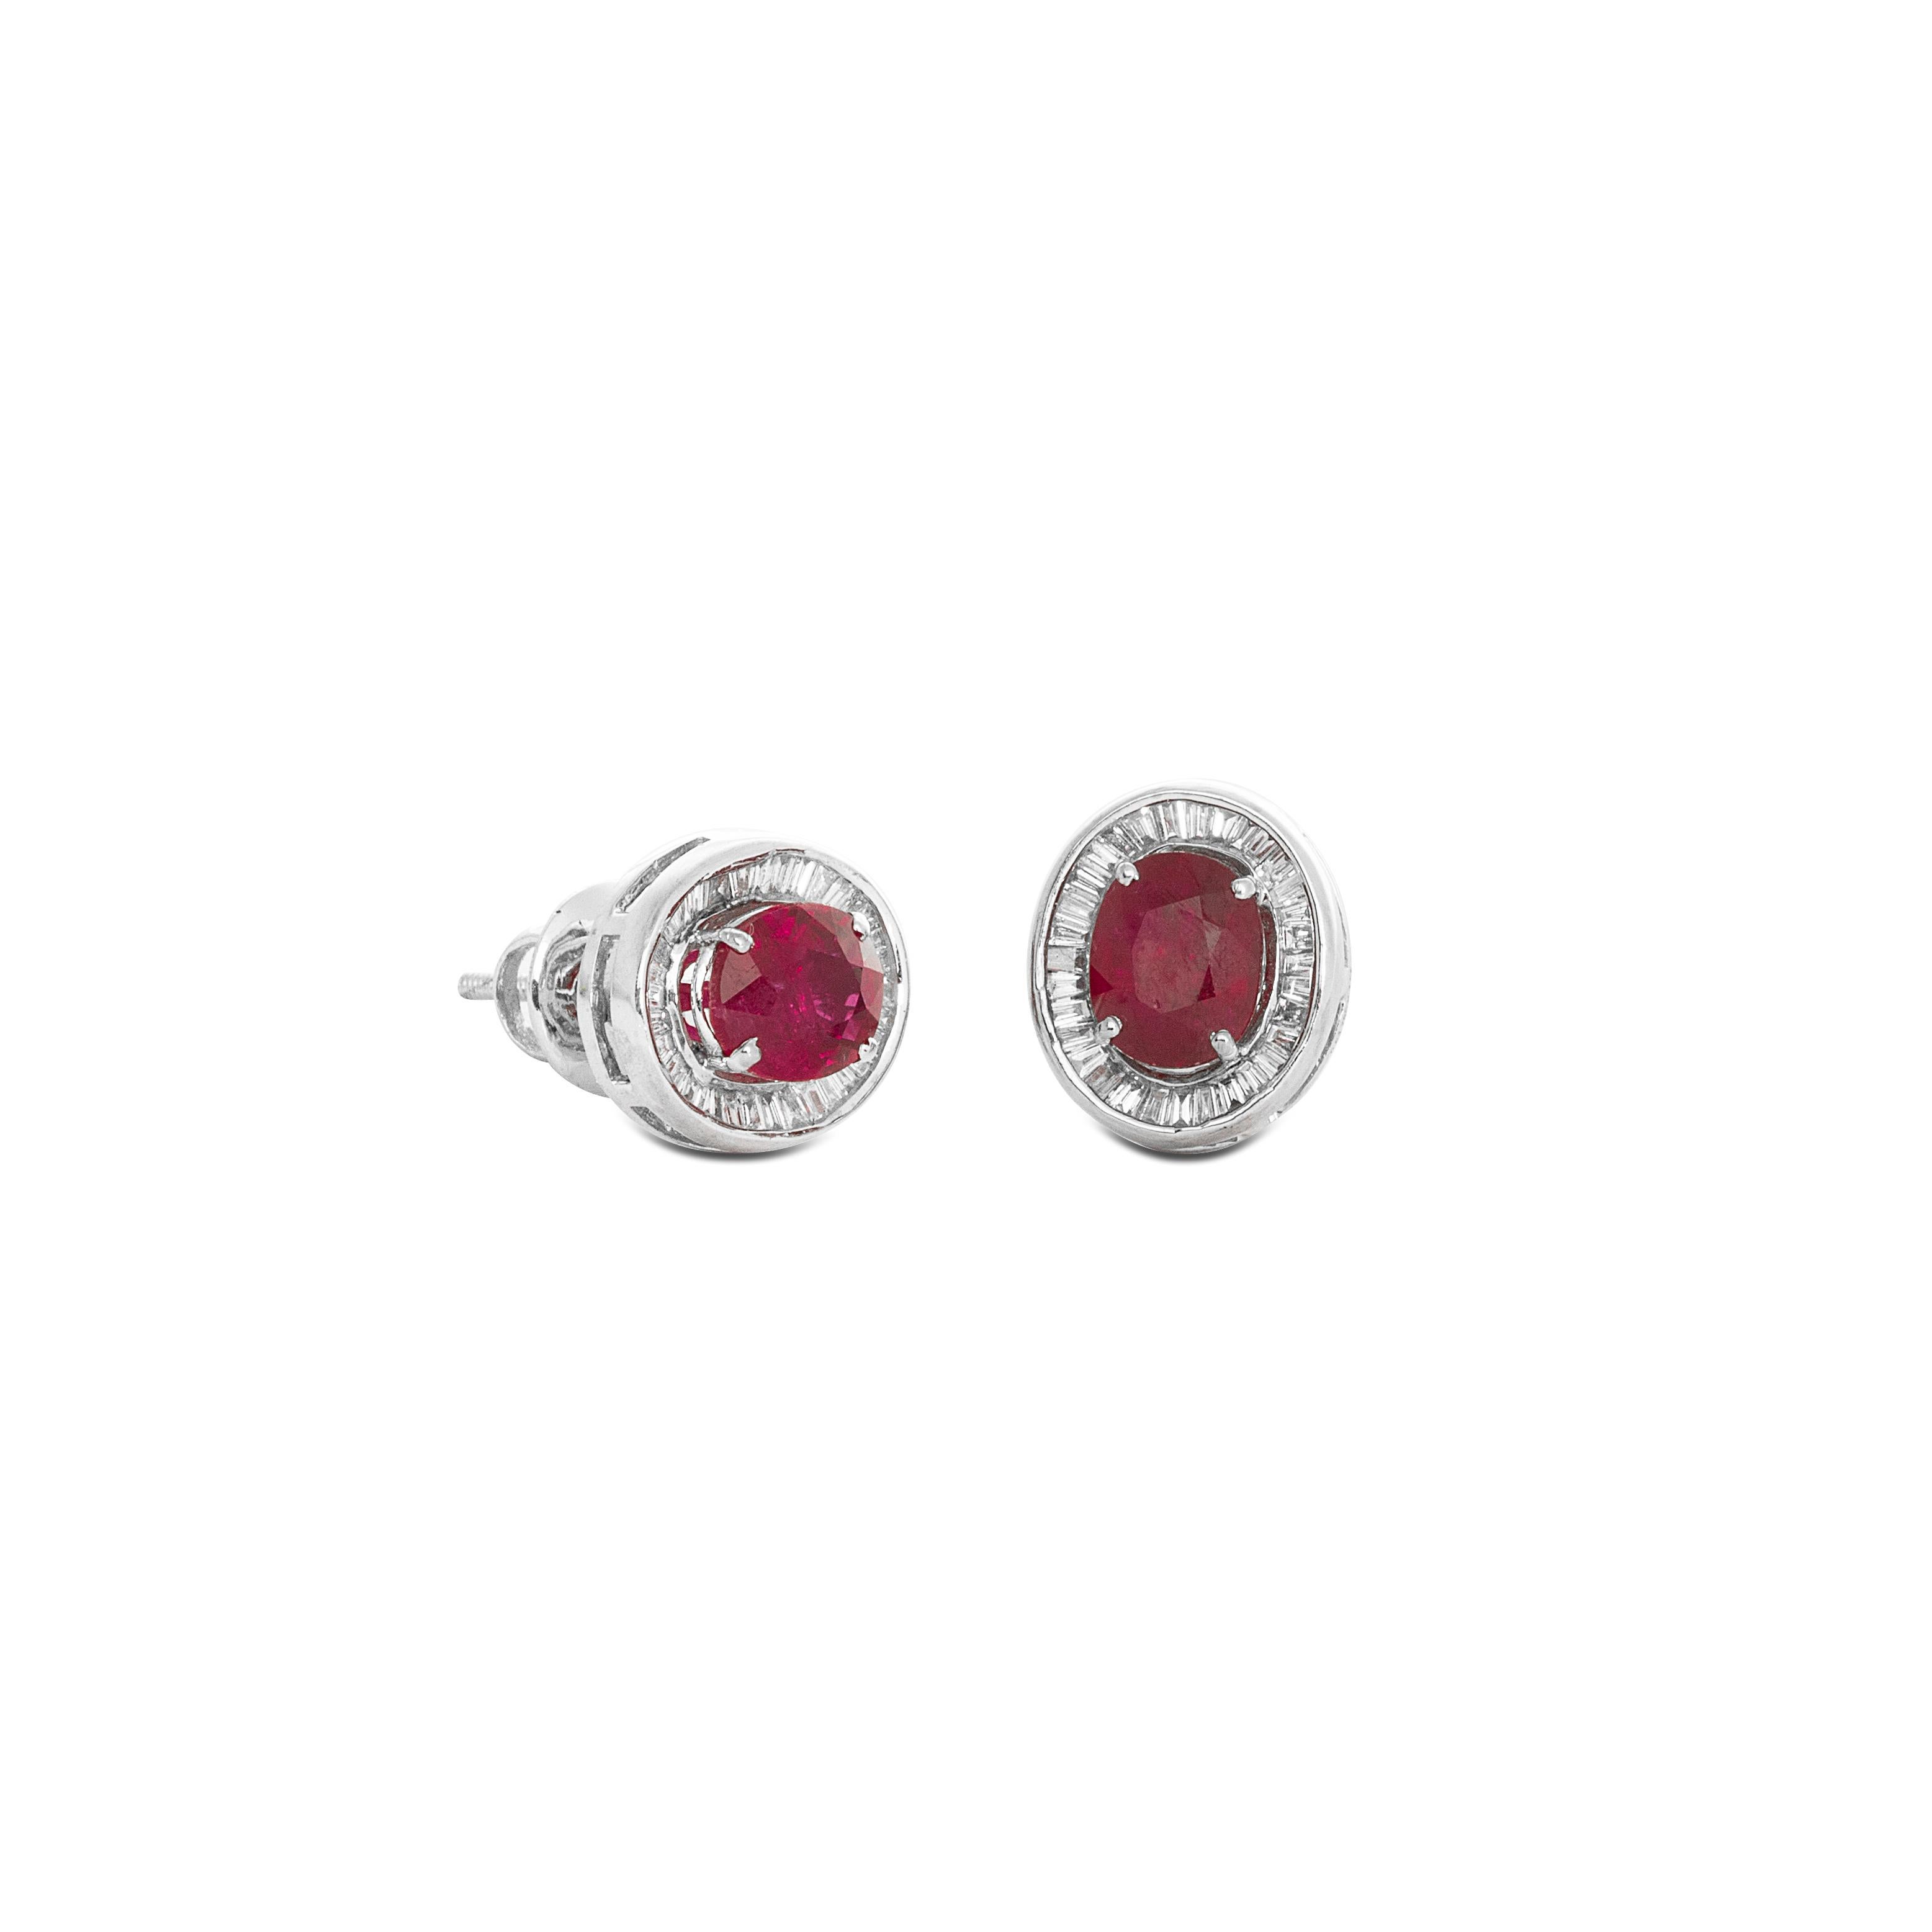 18 Karat White Gold Ruby Baguette Diamond Stud Earrings

Beautiful stud earrings set in 18 Karat white gold studded with rubies and baguette diamonds, perfect for both day and evening wear.

18 Karat Gold - 6.244gms
Rubies - 3.65cts
Diamonds -